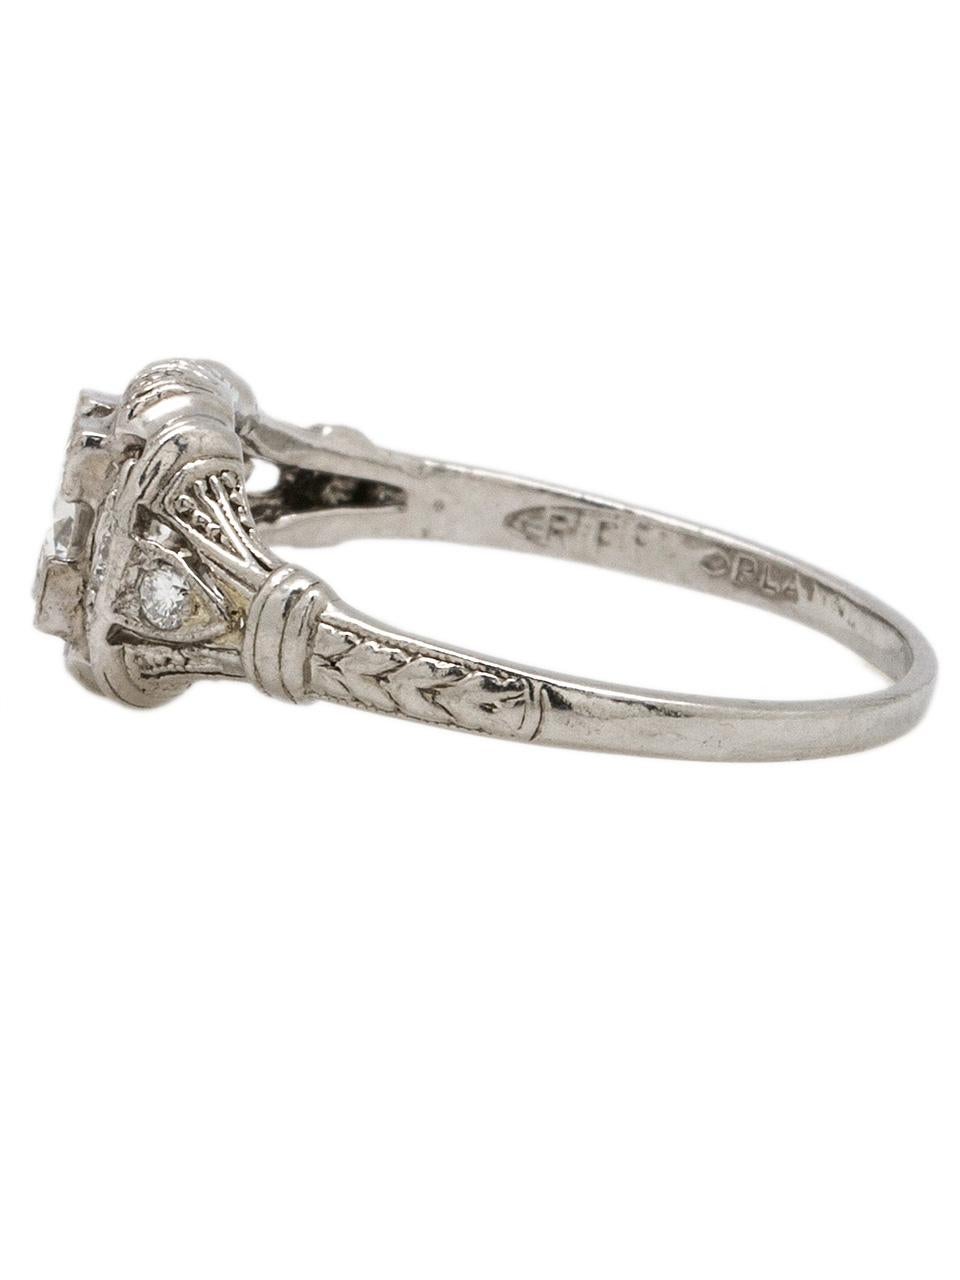 Beautiful vintage platinum diamond engagement ring with bright and lively 0.36ct Old European Cut center diamond with G color (near colorless) SI1 clarity . Fantastic, whimsical engraving and milgrain detail surround four round cut sides diamonds.